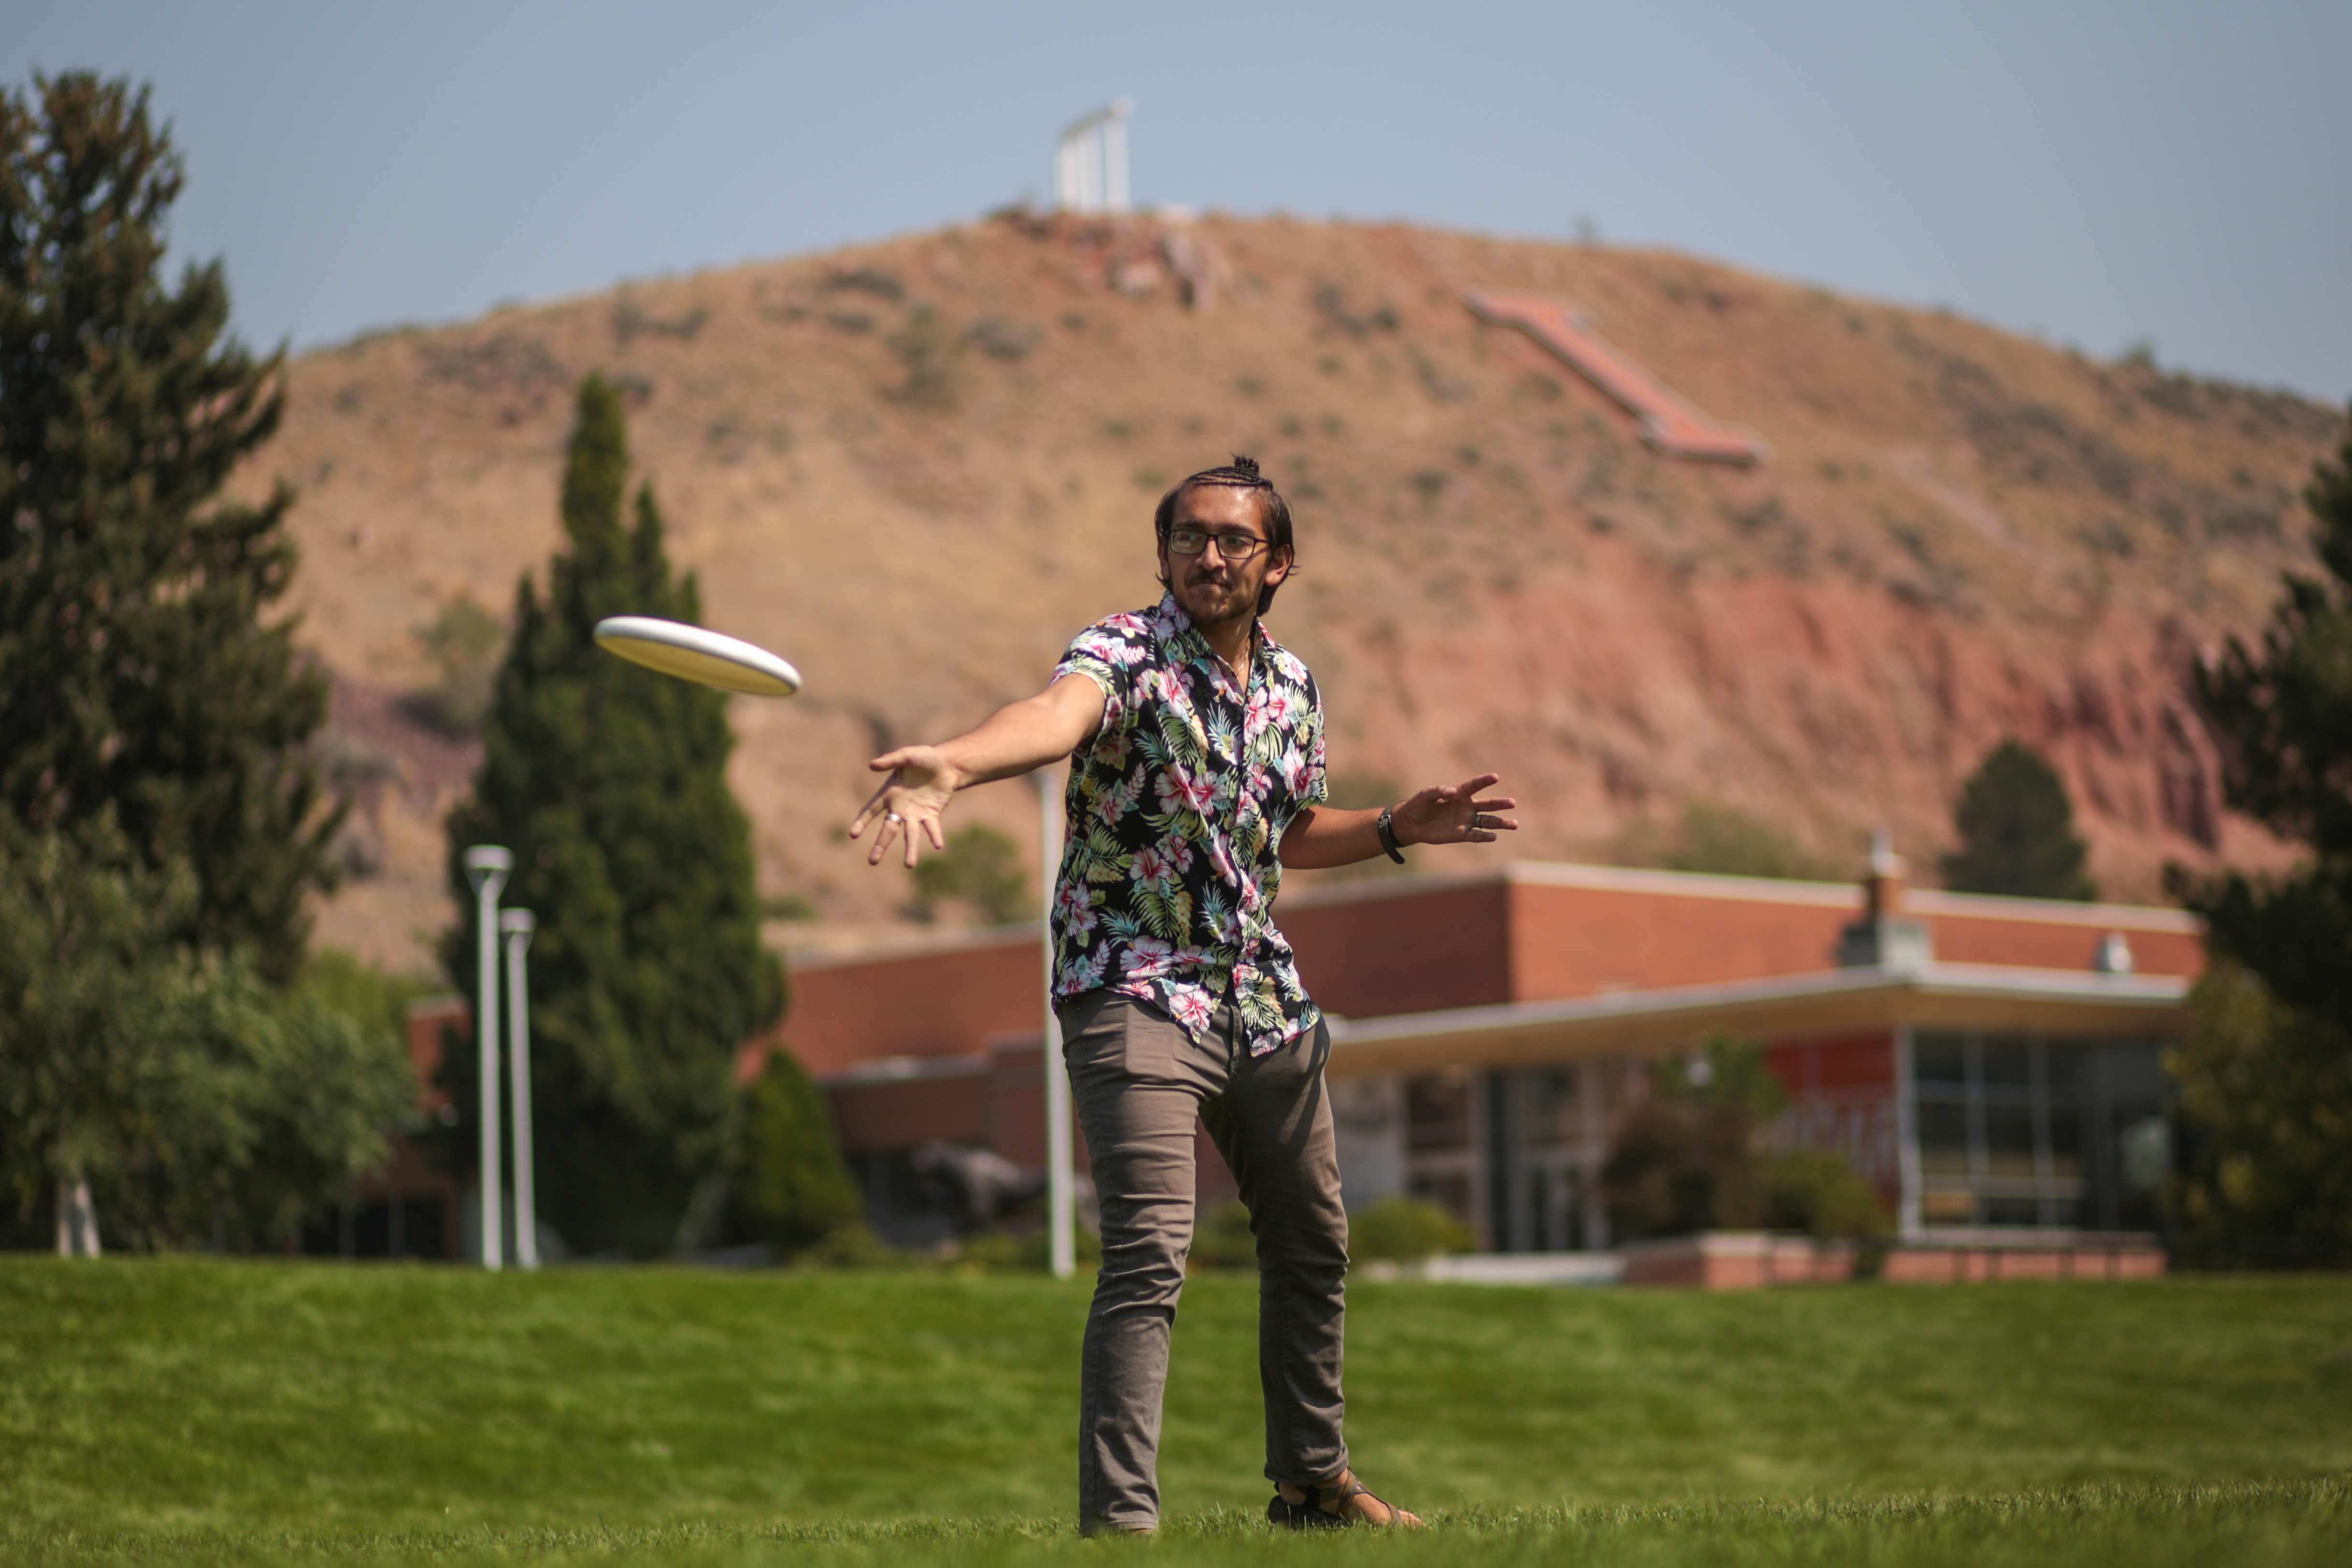 A student on the Quad throwing a frisbee